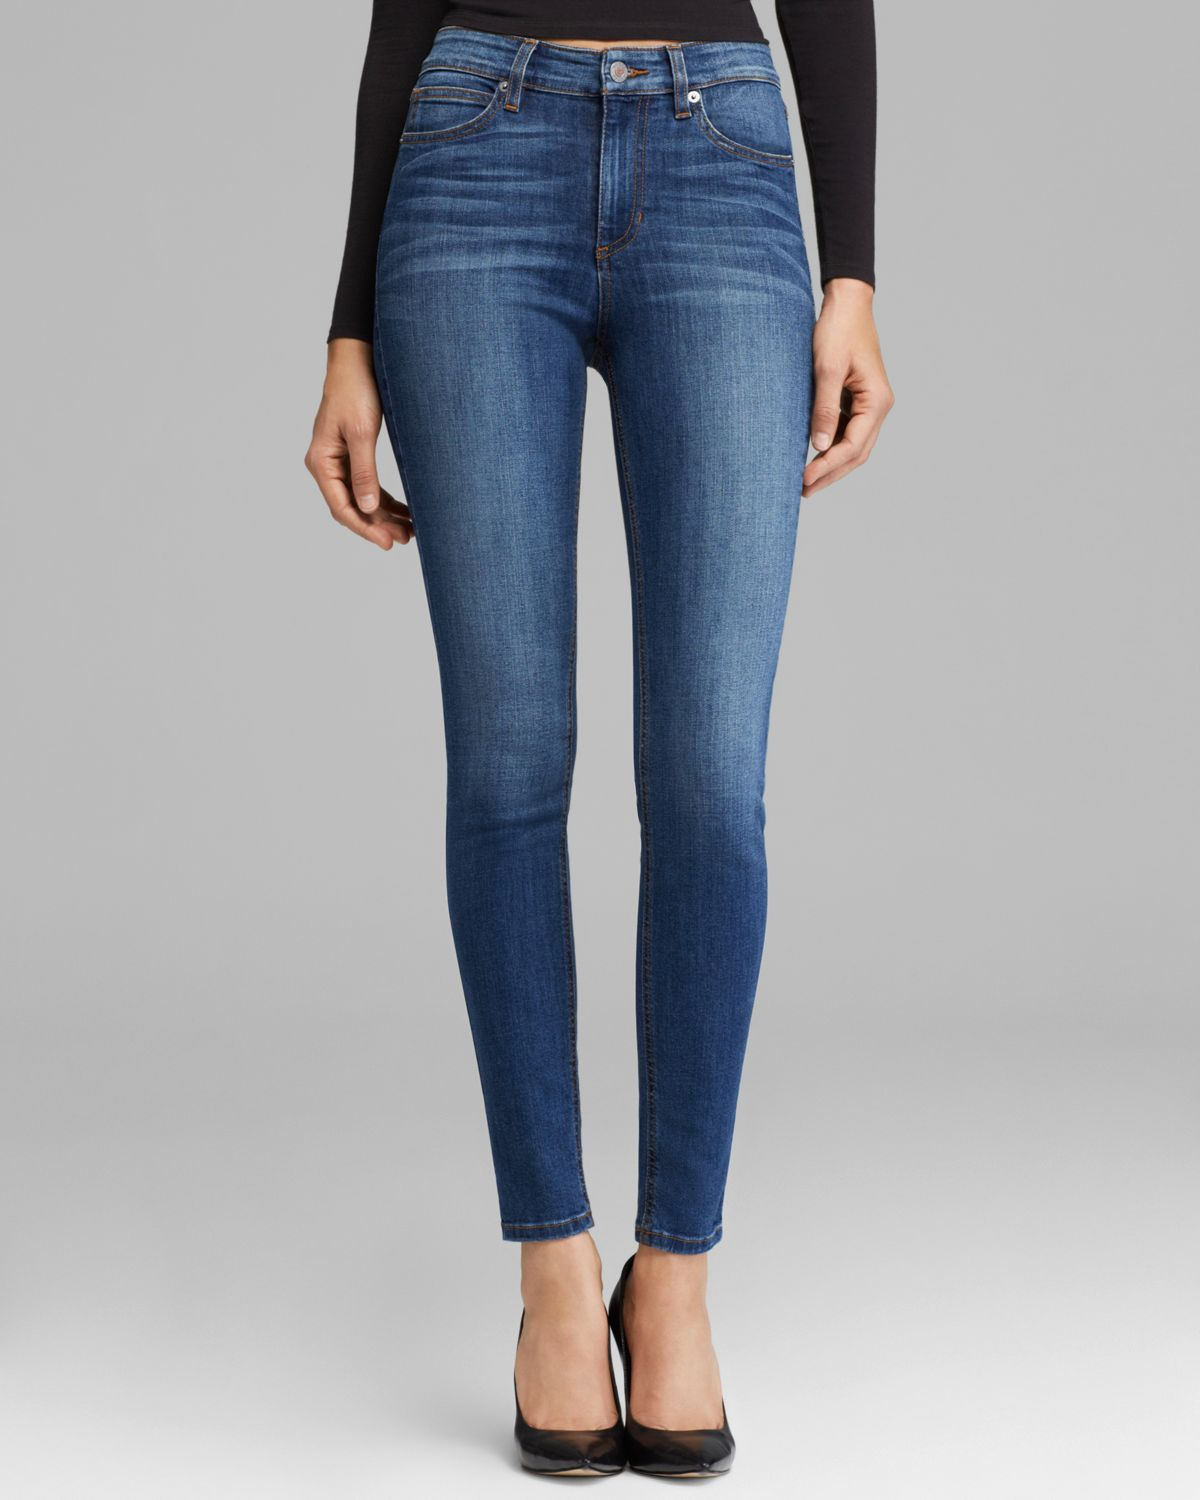 Guess Jeans High Waist Skinny in Lyon Wash in Blue - Lyst